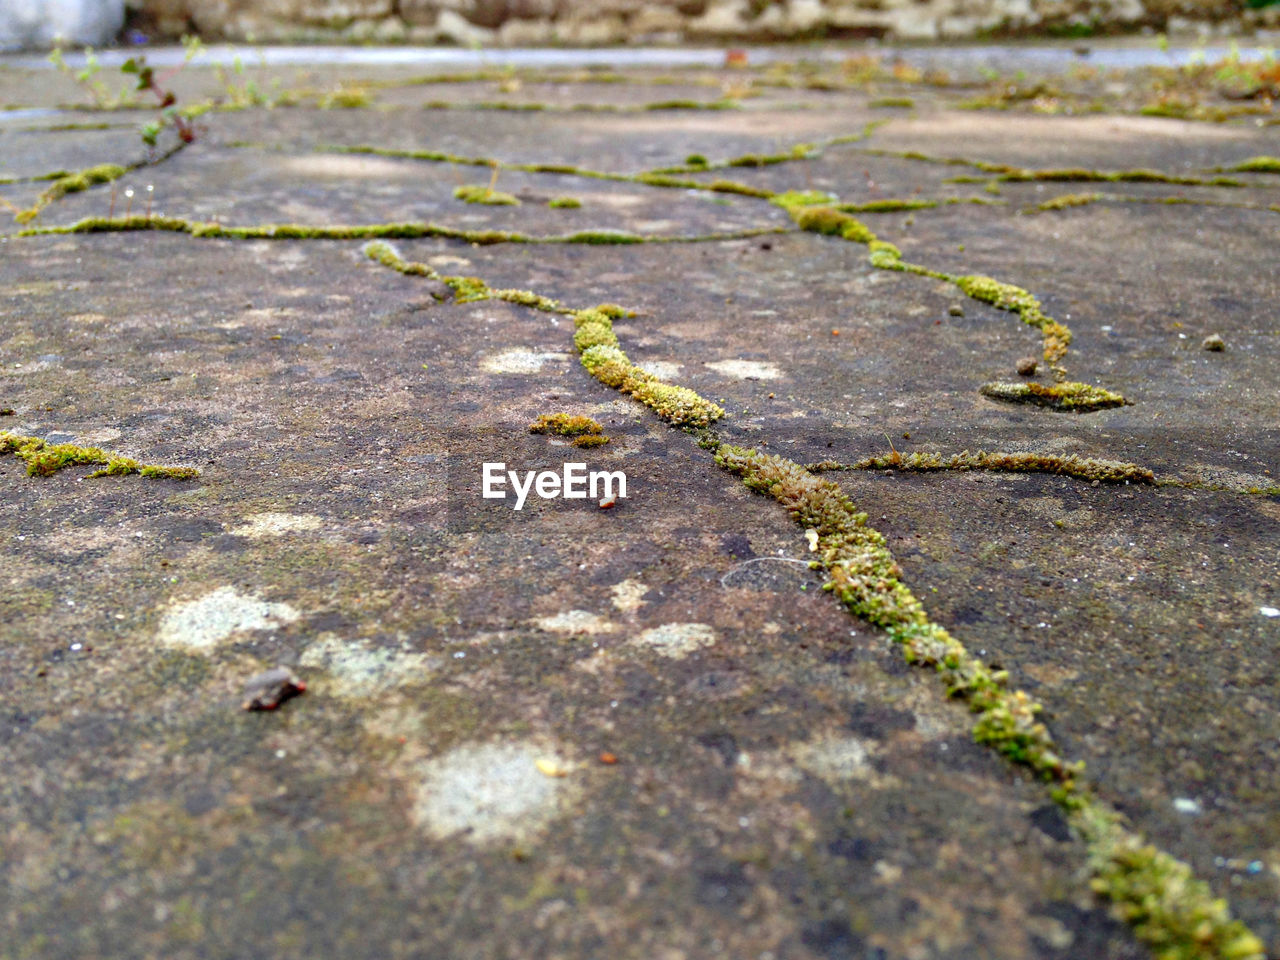 Surface level shot of moss growing on street